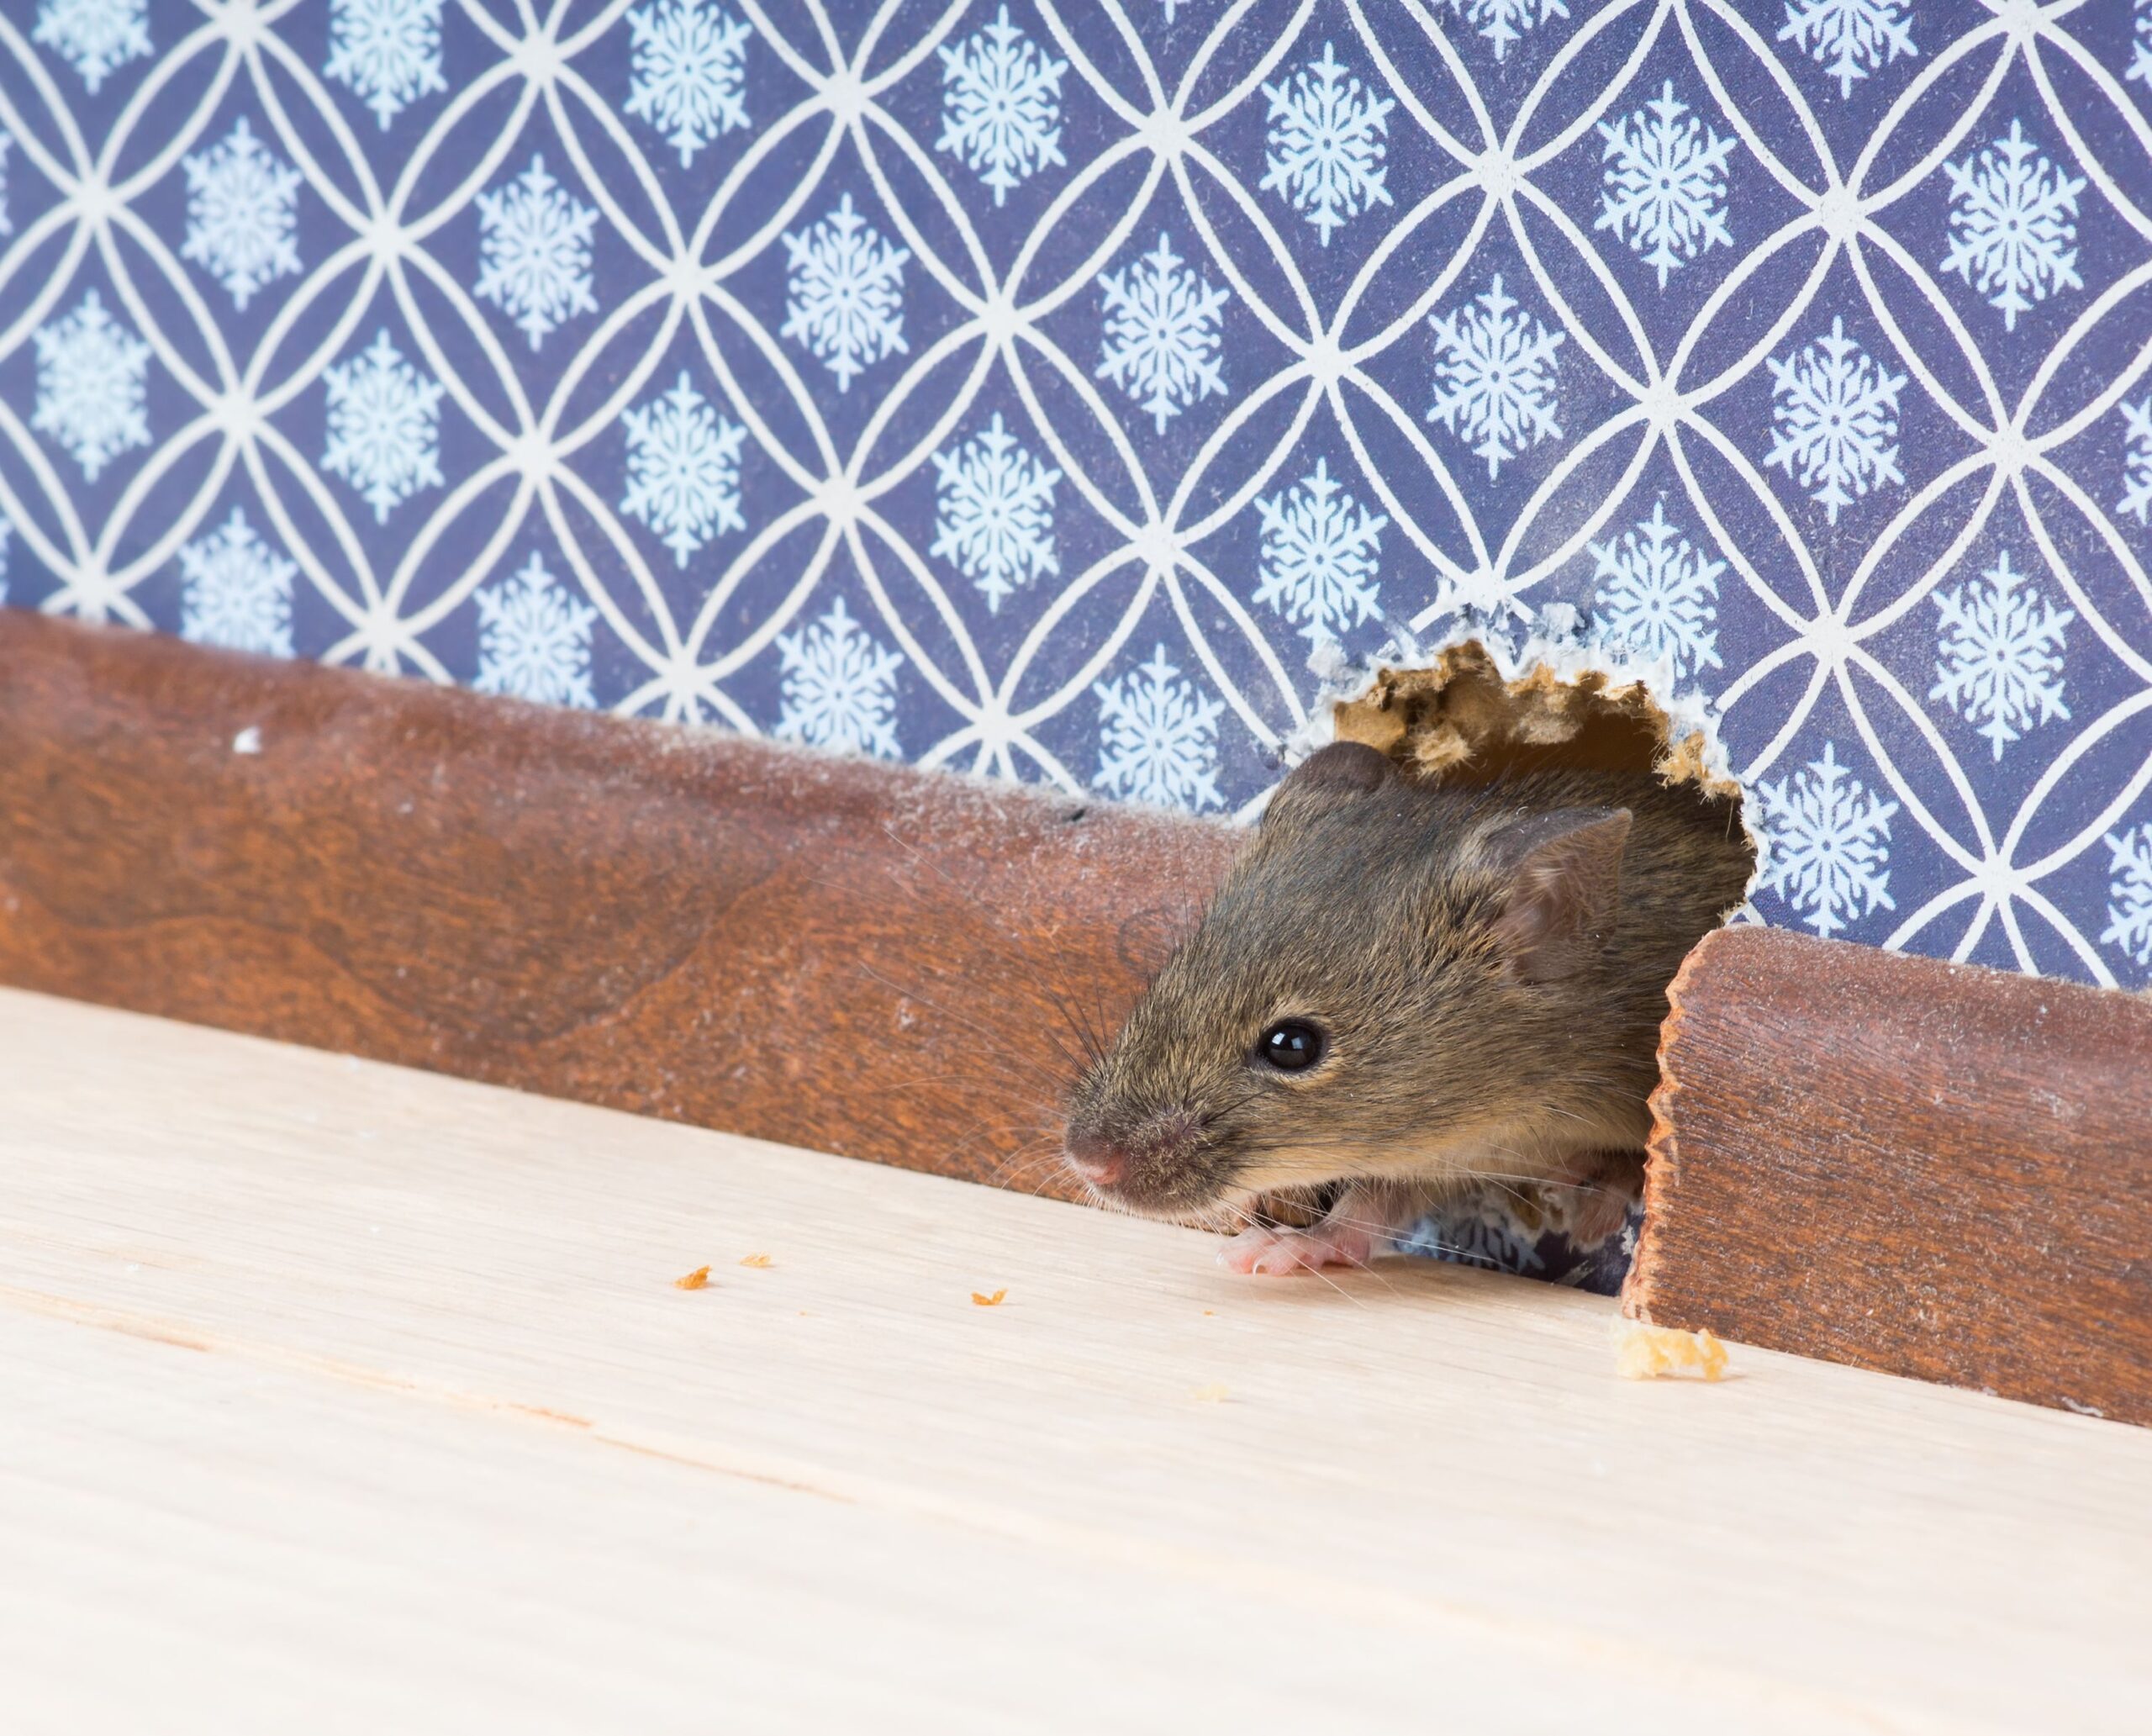 Effective Ways to Rat-Proof Your Home & Keep Rodents at Bay